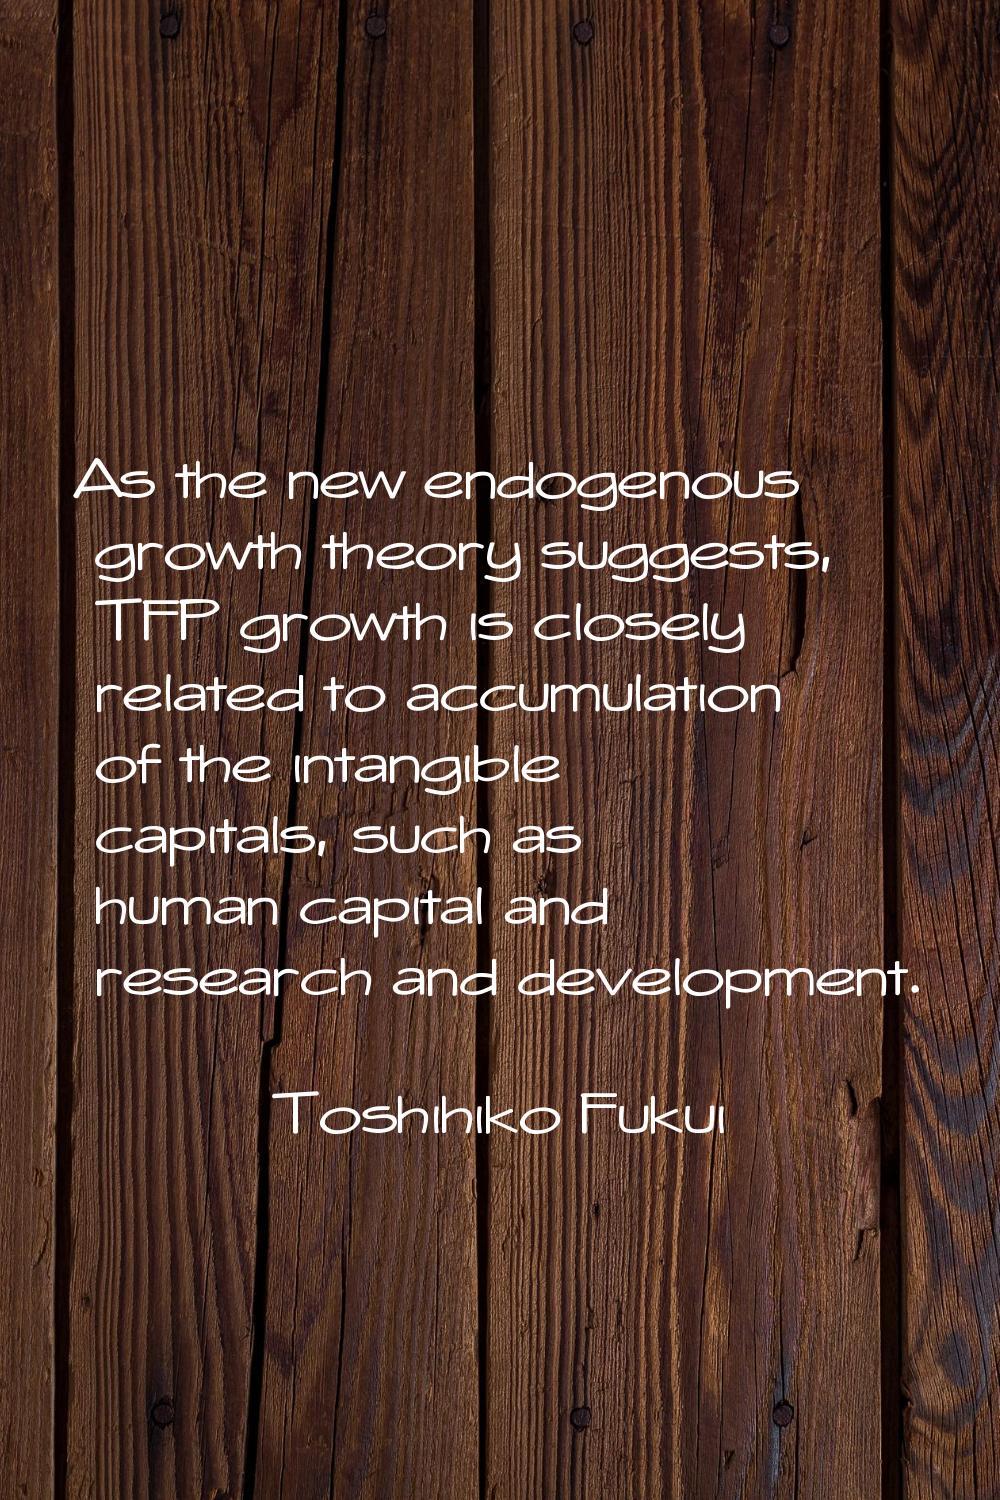 As the new endogenous growth theory suggests, TFP growth is closely related to accumulation of the 